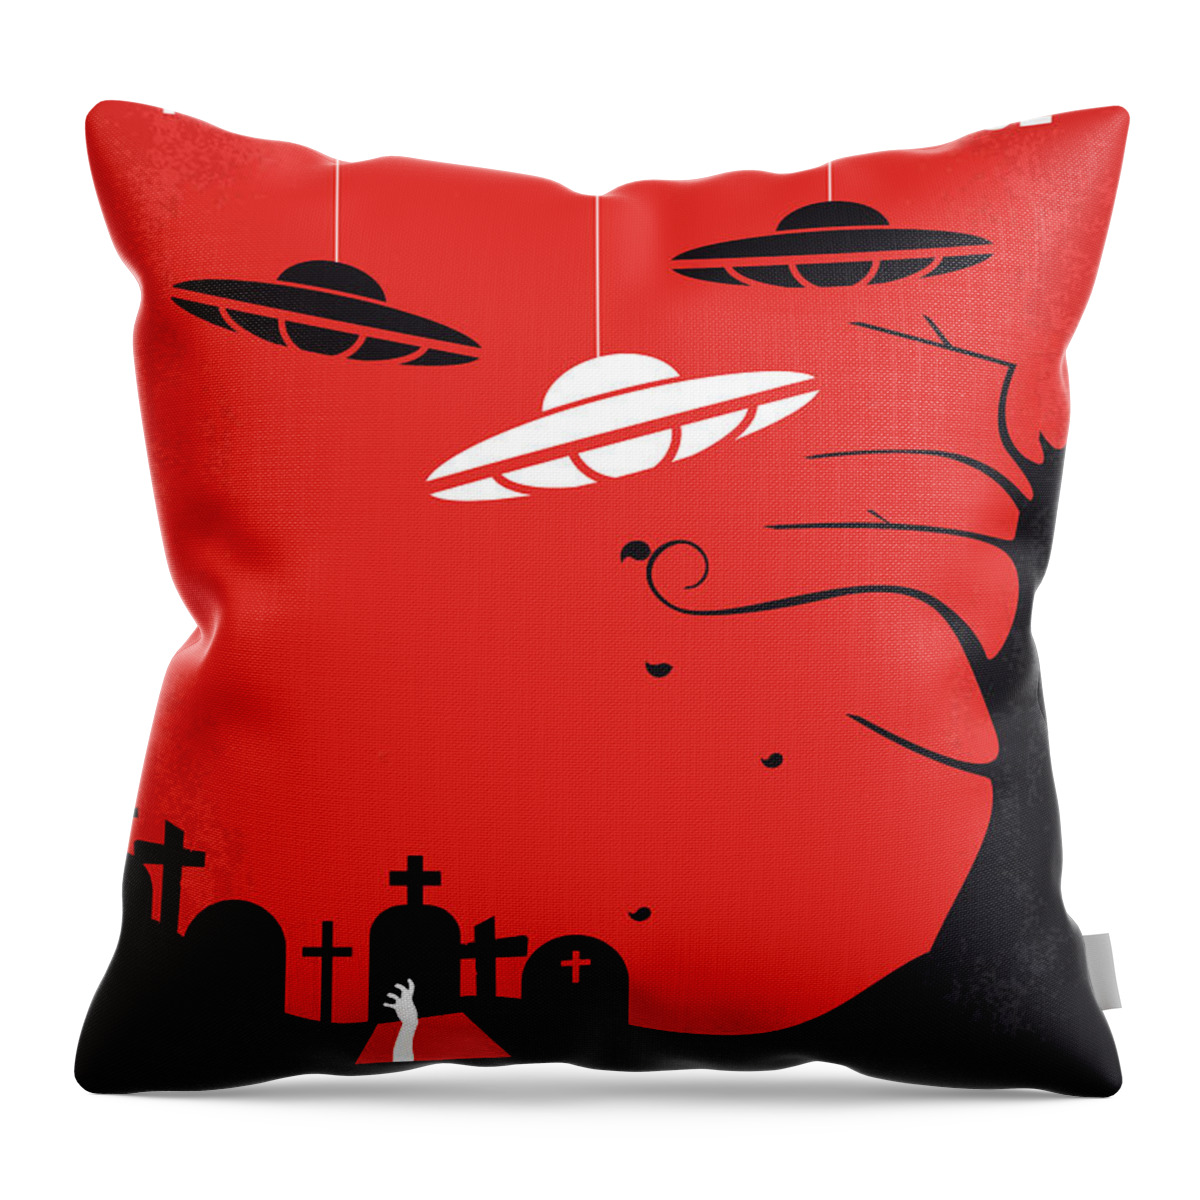 Plan 9 From Outer Space Throw Pillow featuring the digital art No518 My Plan 9 From Outer Space minimal movie poster by Chungkong Art